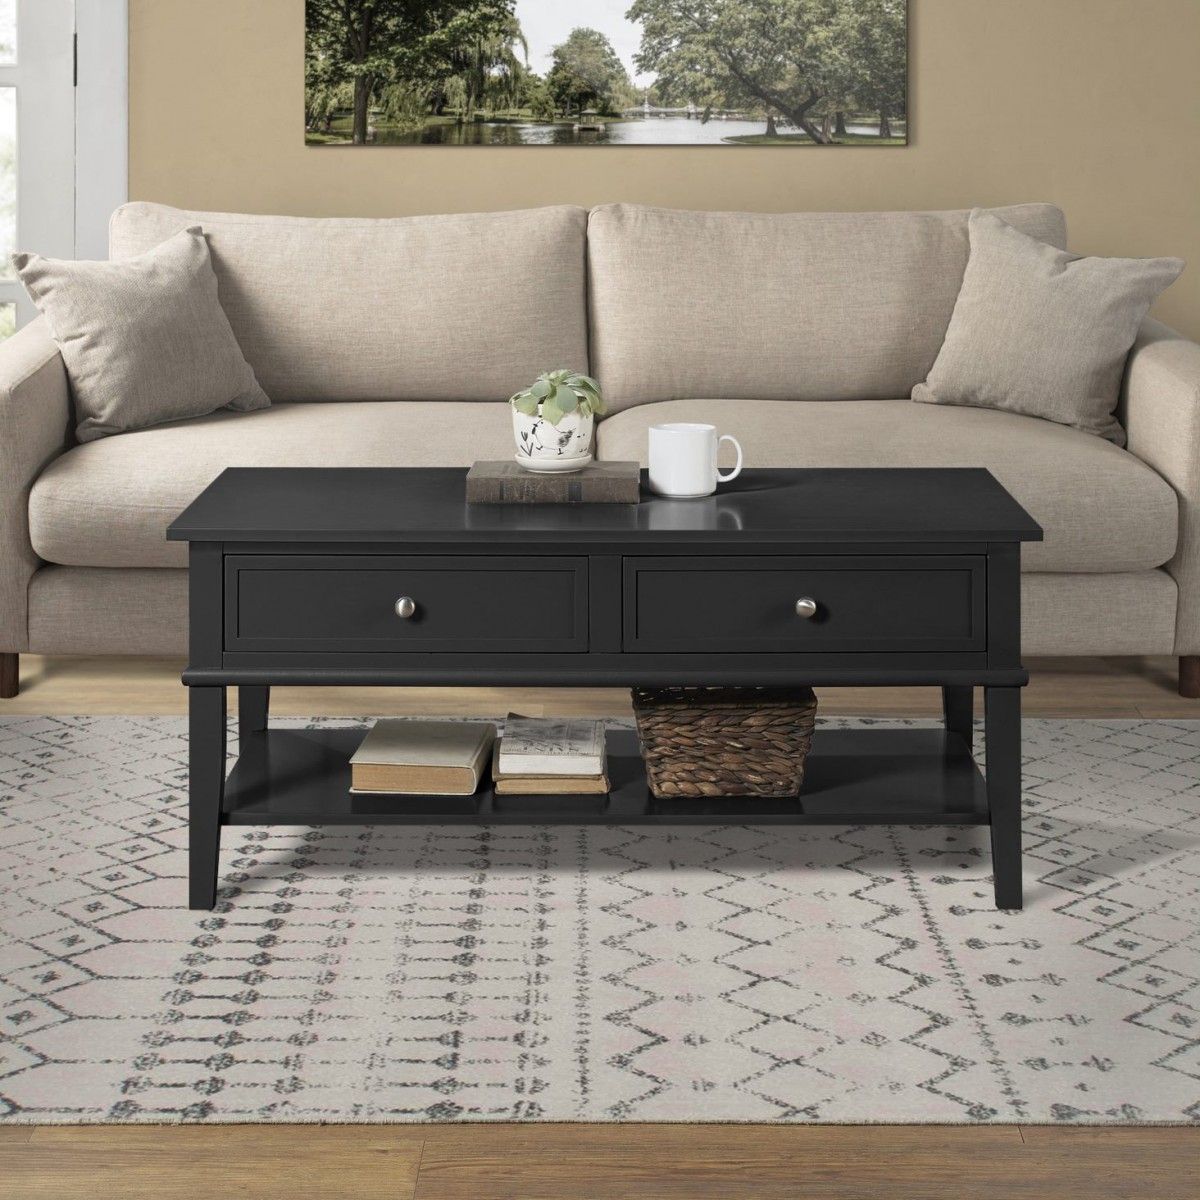 Dorel Franklin Coffee Table Black Grey Or White Painted Wood Intended For Gray And Gold Coffee Tables (View 11 of 15)